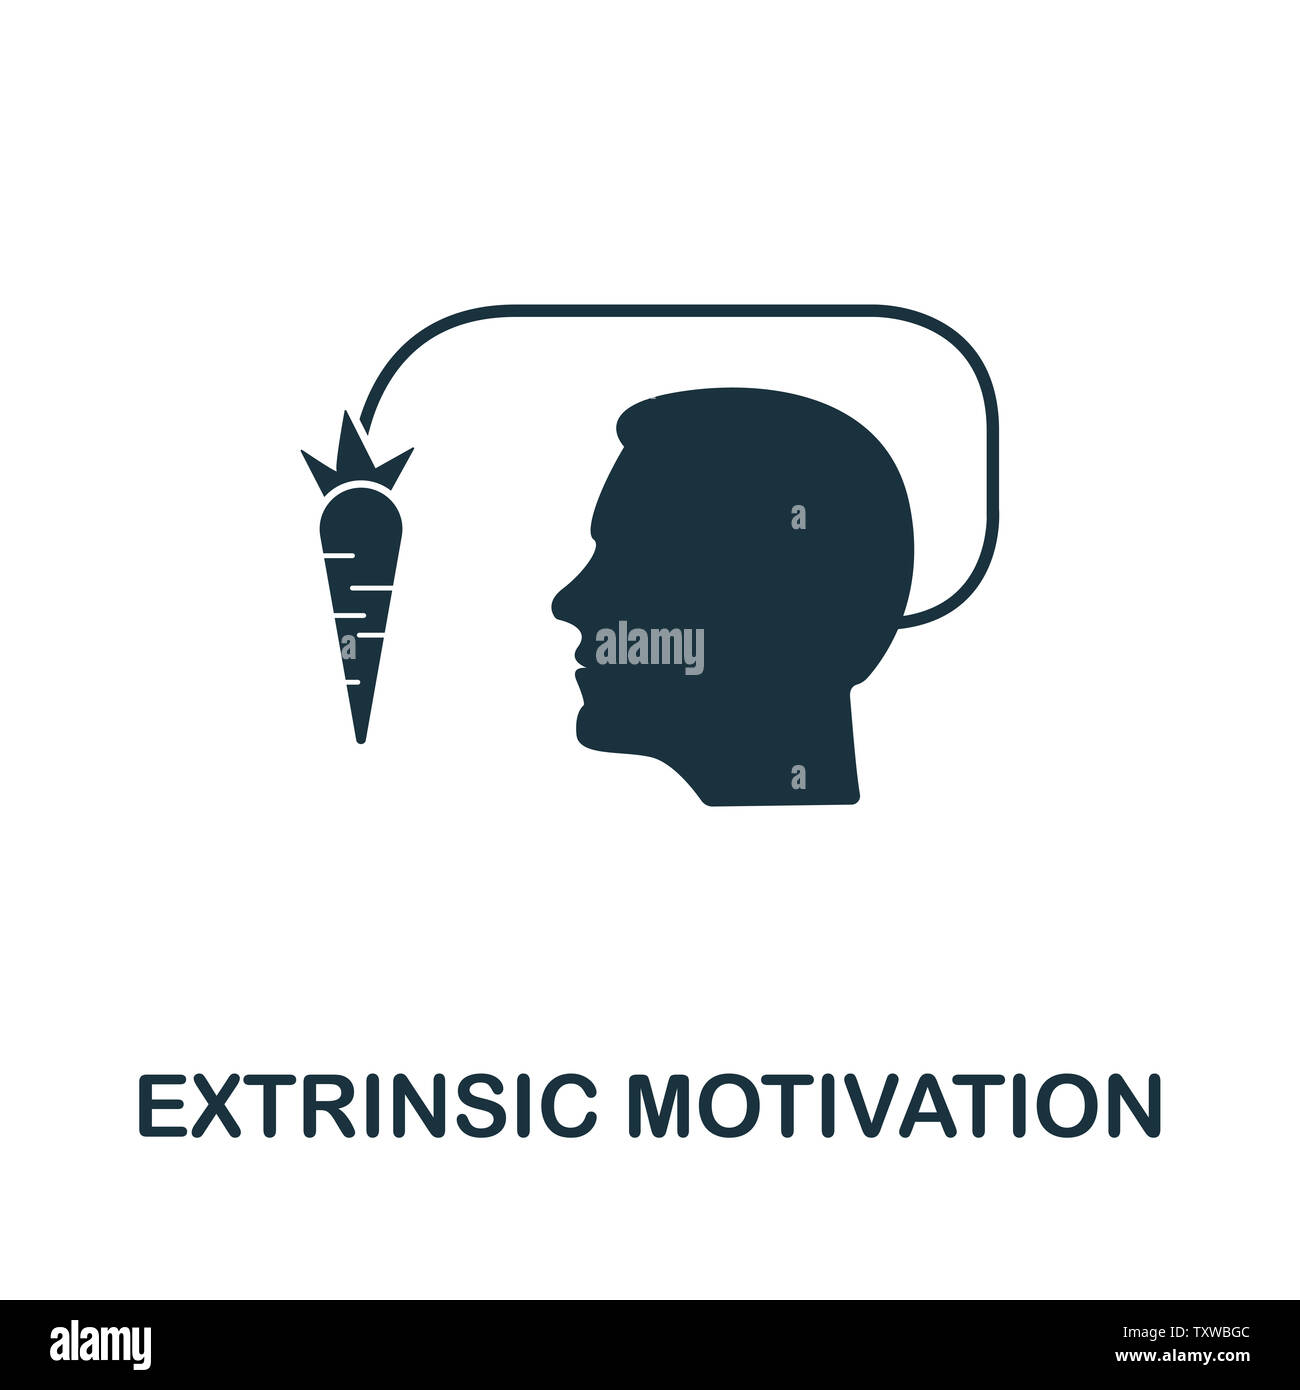 Extrinsic Motivation icon symbol. Creative sign from gamification icons collection. Filled flat Extrinsic Motivation icon for computer and mobile Stock Photo